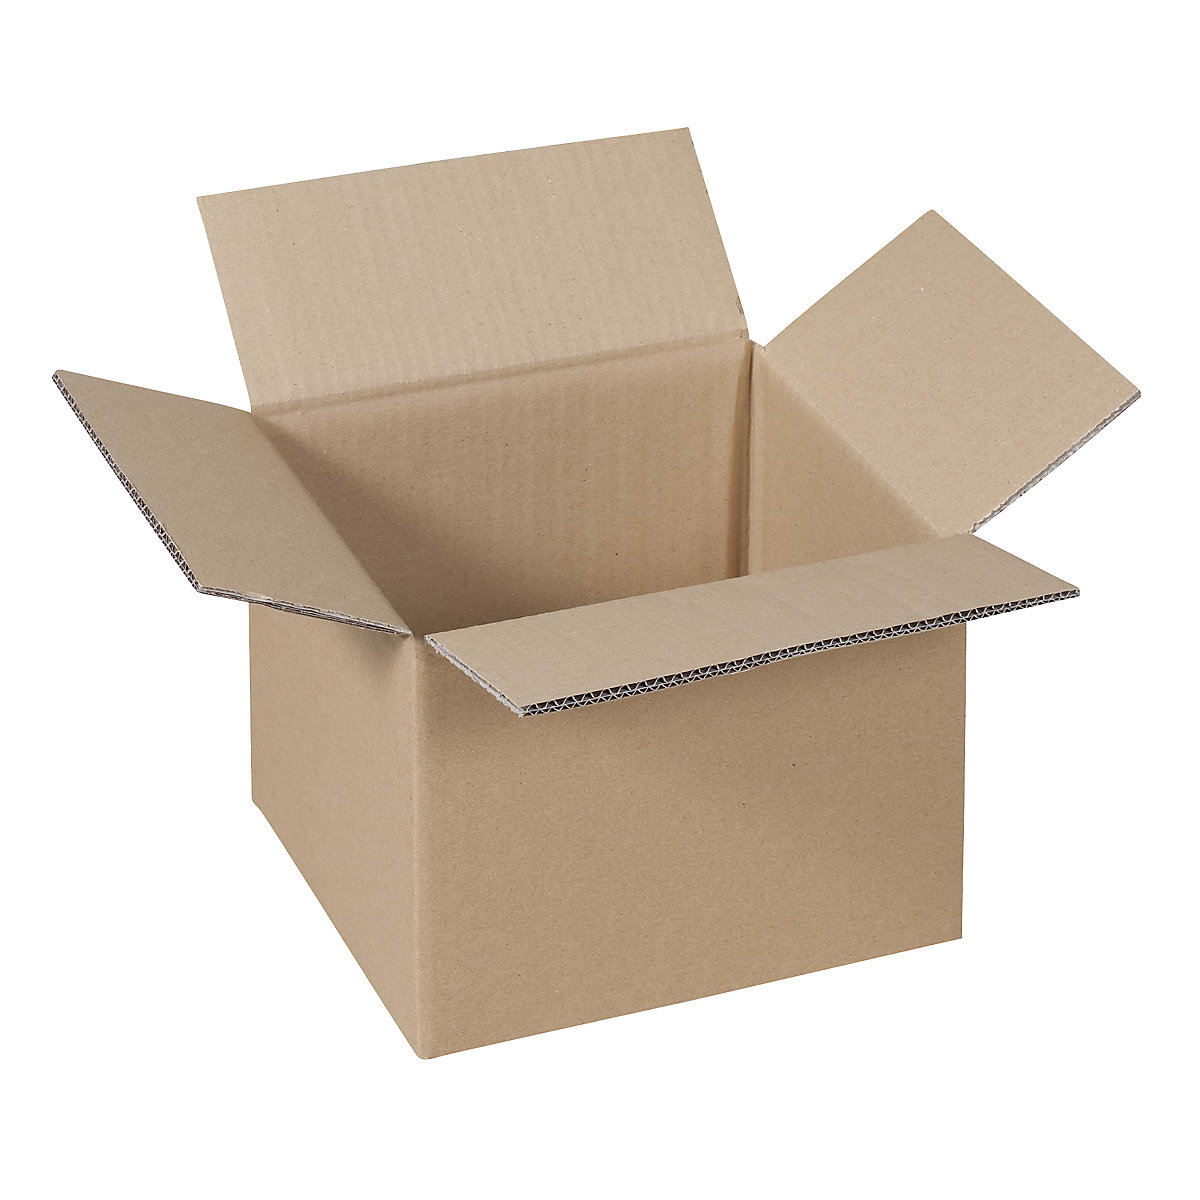 Folding cardboard box, FEFCO 0201, made of double fluted cardboard, internal dimensions 315 x 220 x 140 mm, pack of 50-41